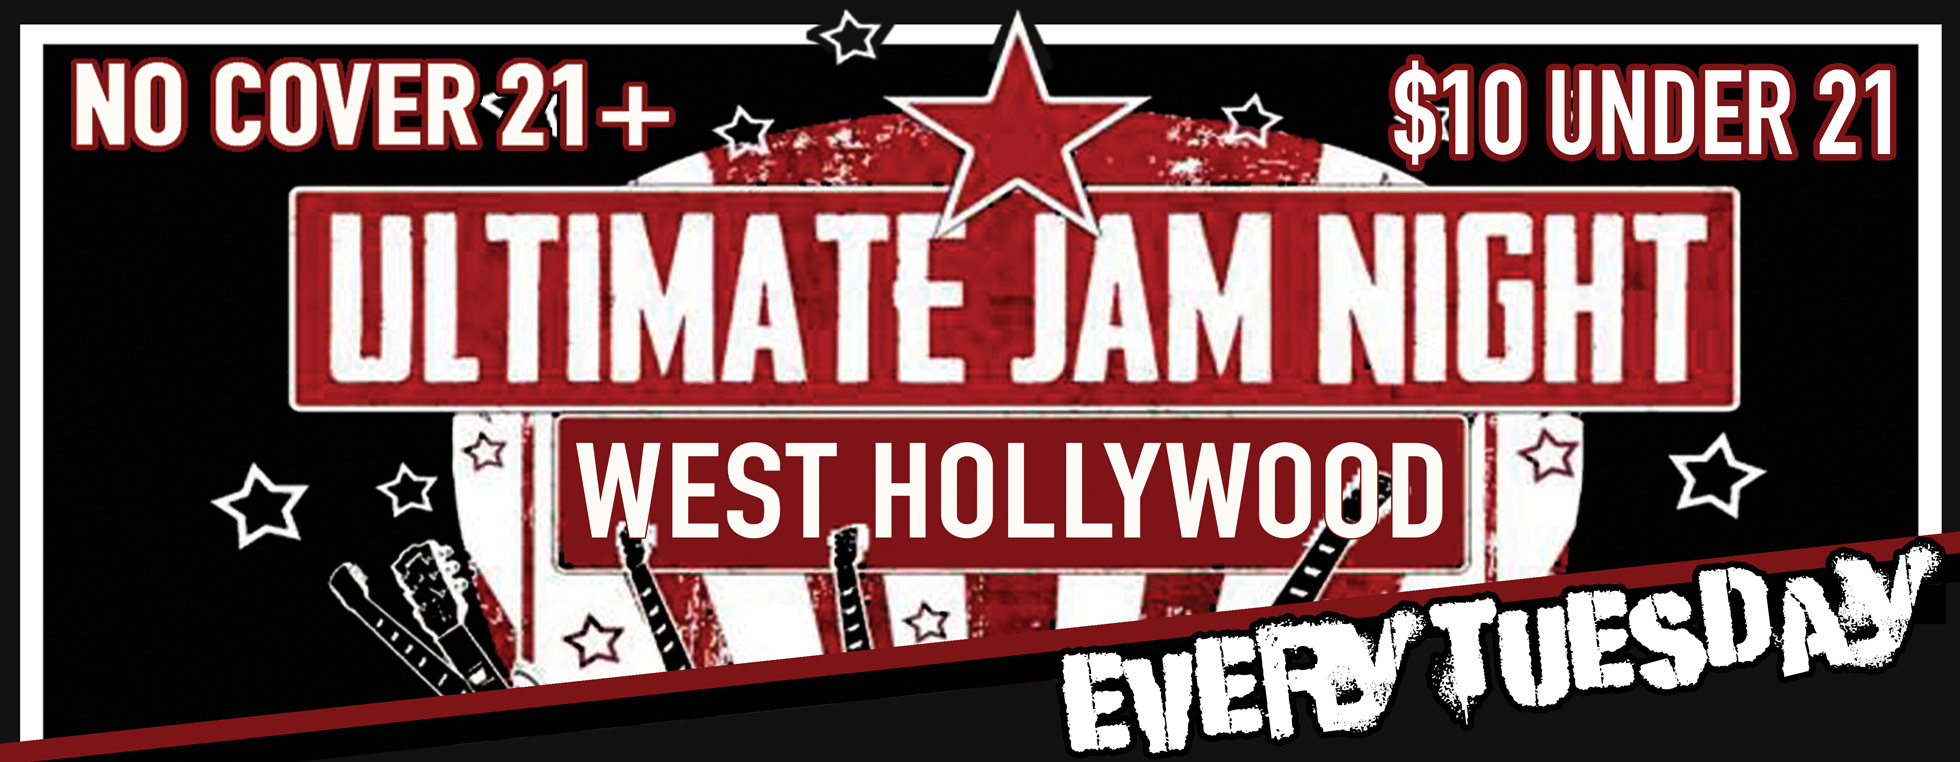 Every Tuesday, Ultimate Jam night, All Ages, 21+ No Cover, Under 21 $10